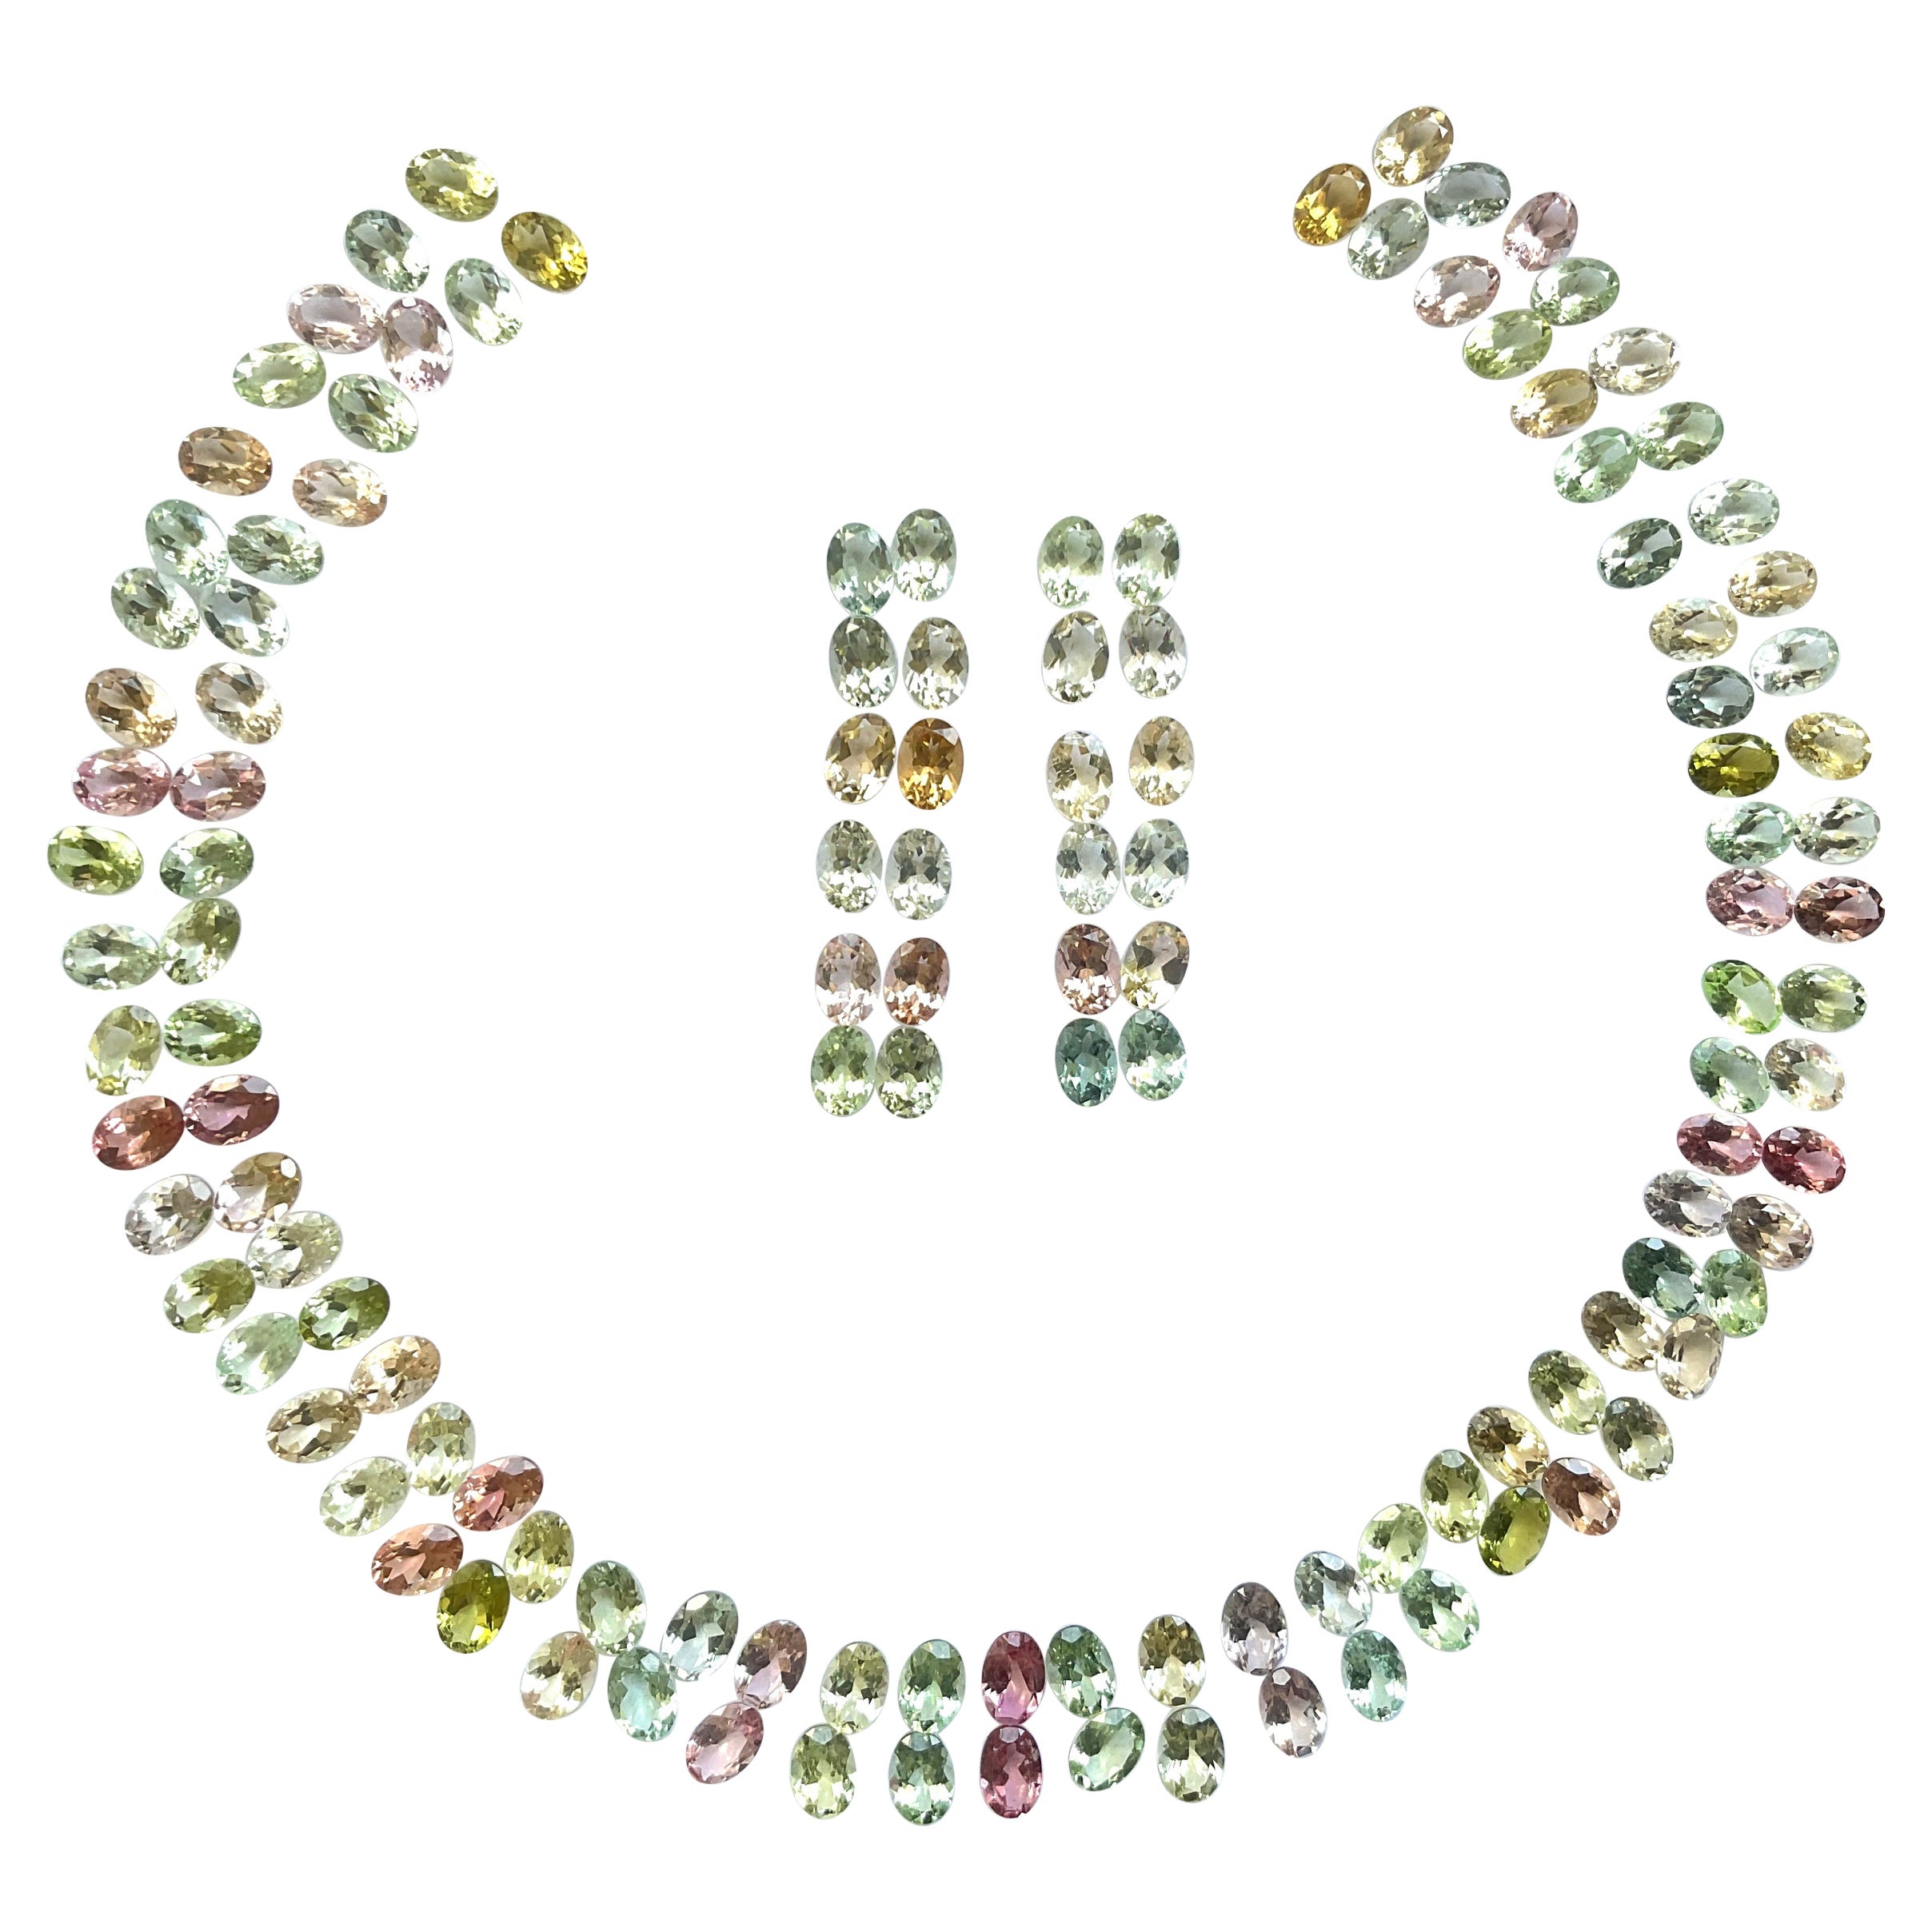 98.15 Carats Oval Tourmaline Layout Suite Faceted Cut Stones Natural Gems